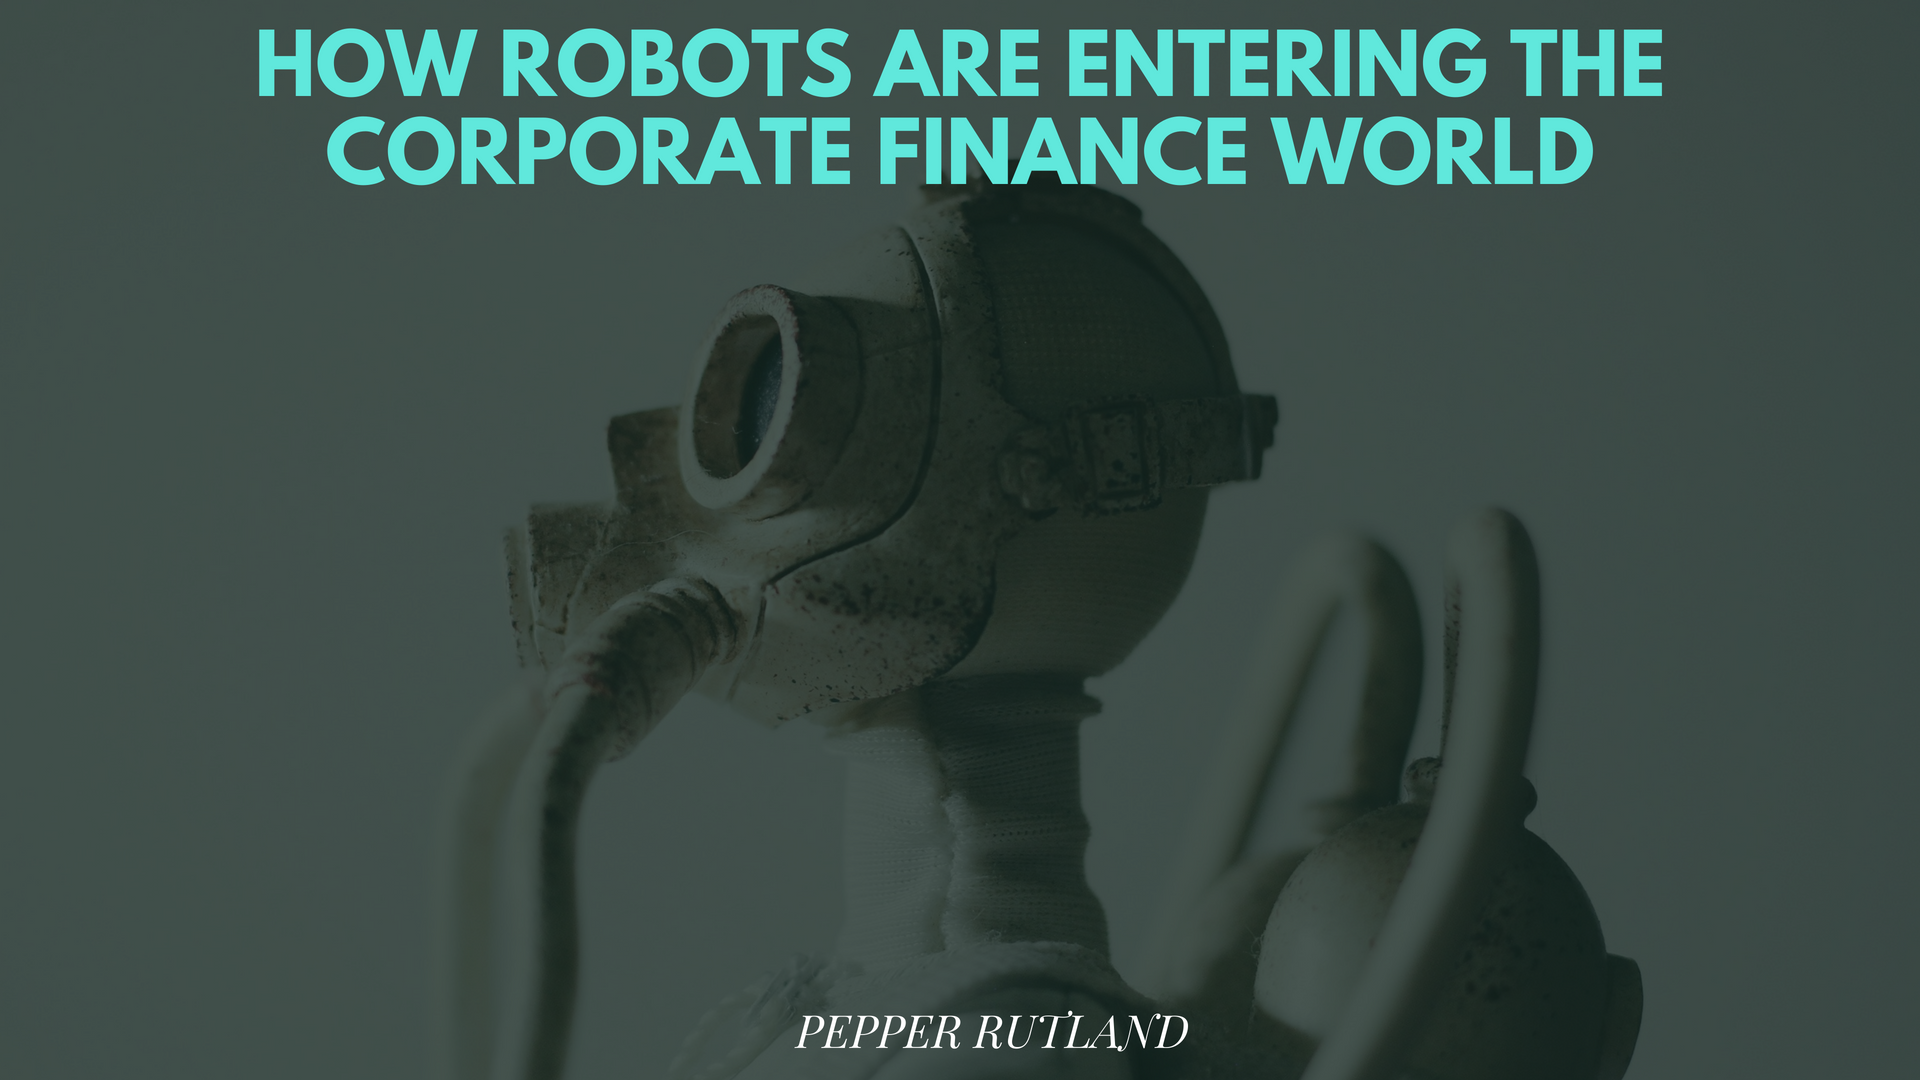 How Robots are Entering the Corporate Finance World